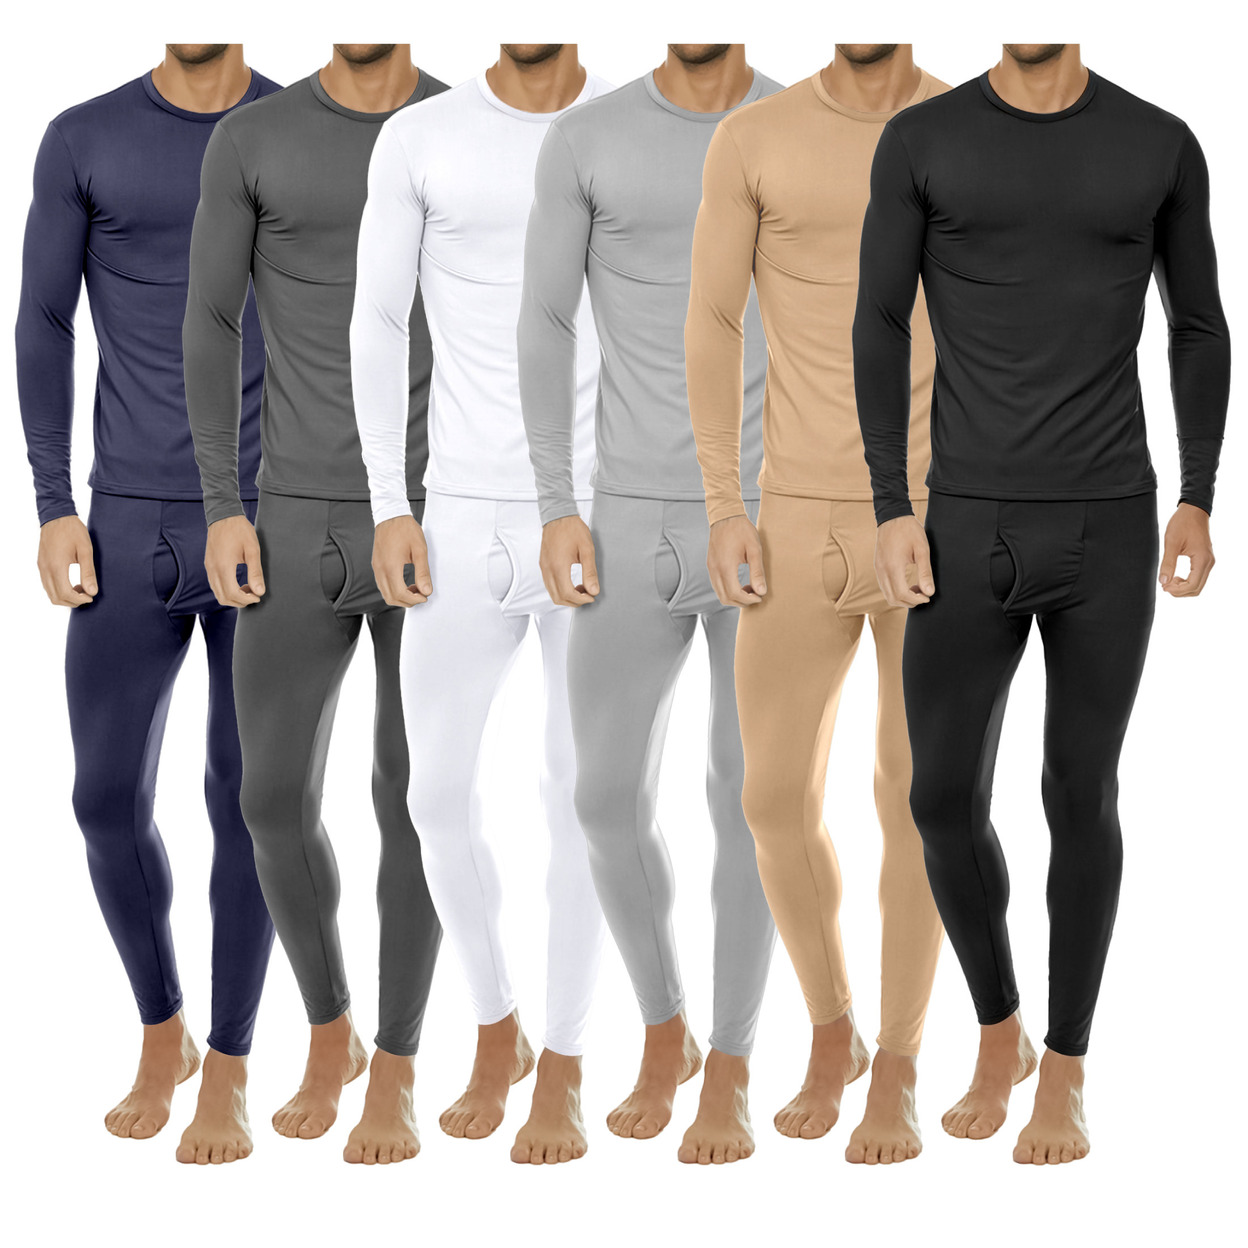 2-Pieces: Men's Winter Warm Fleece Lined Thermal Underwear Set For Cold Weather - Black, X-large